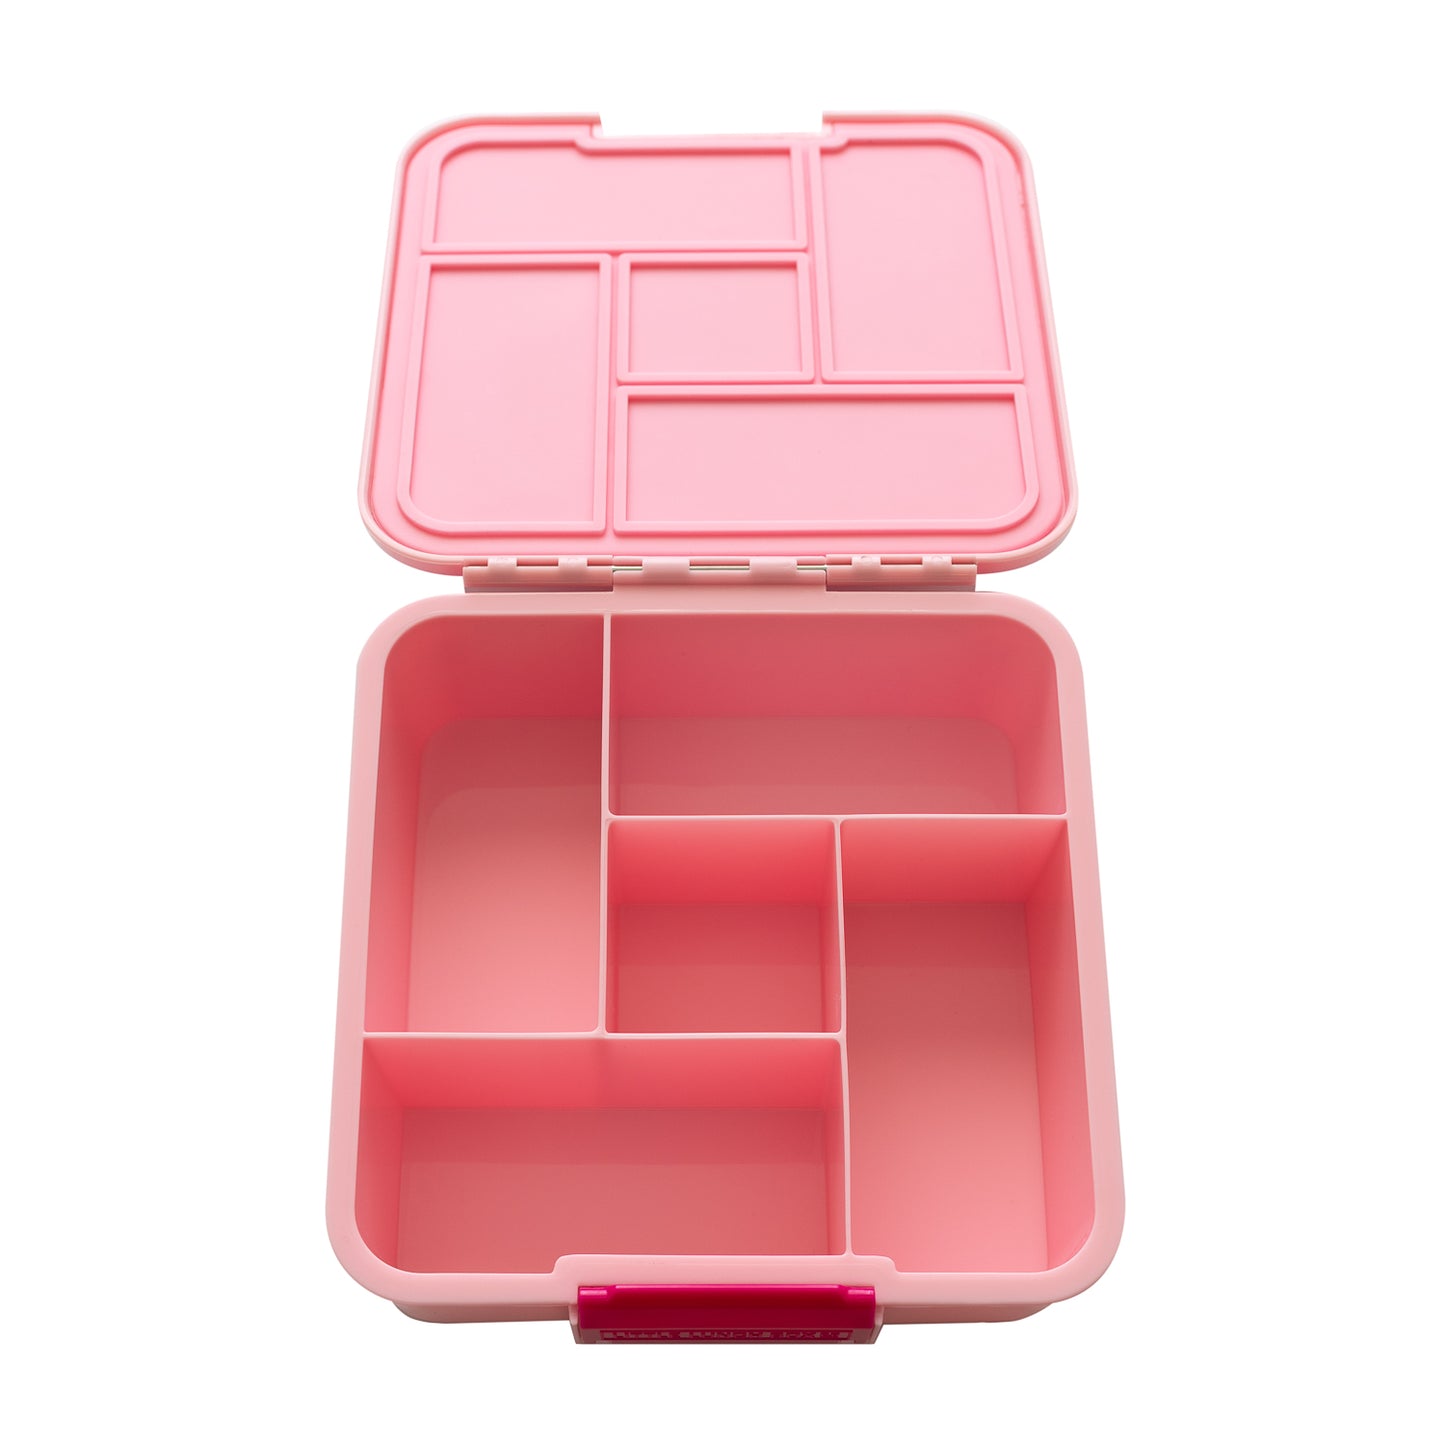 Little Lunch Box Co Bento Five - Kitty